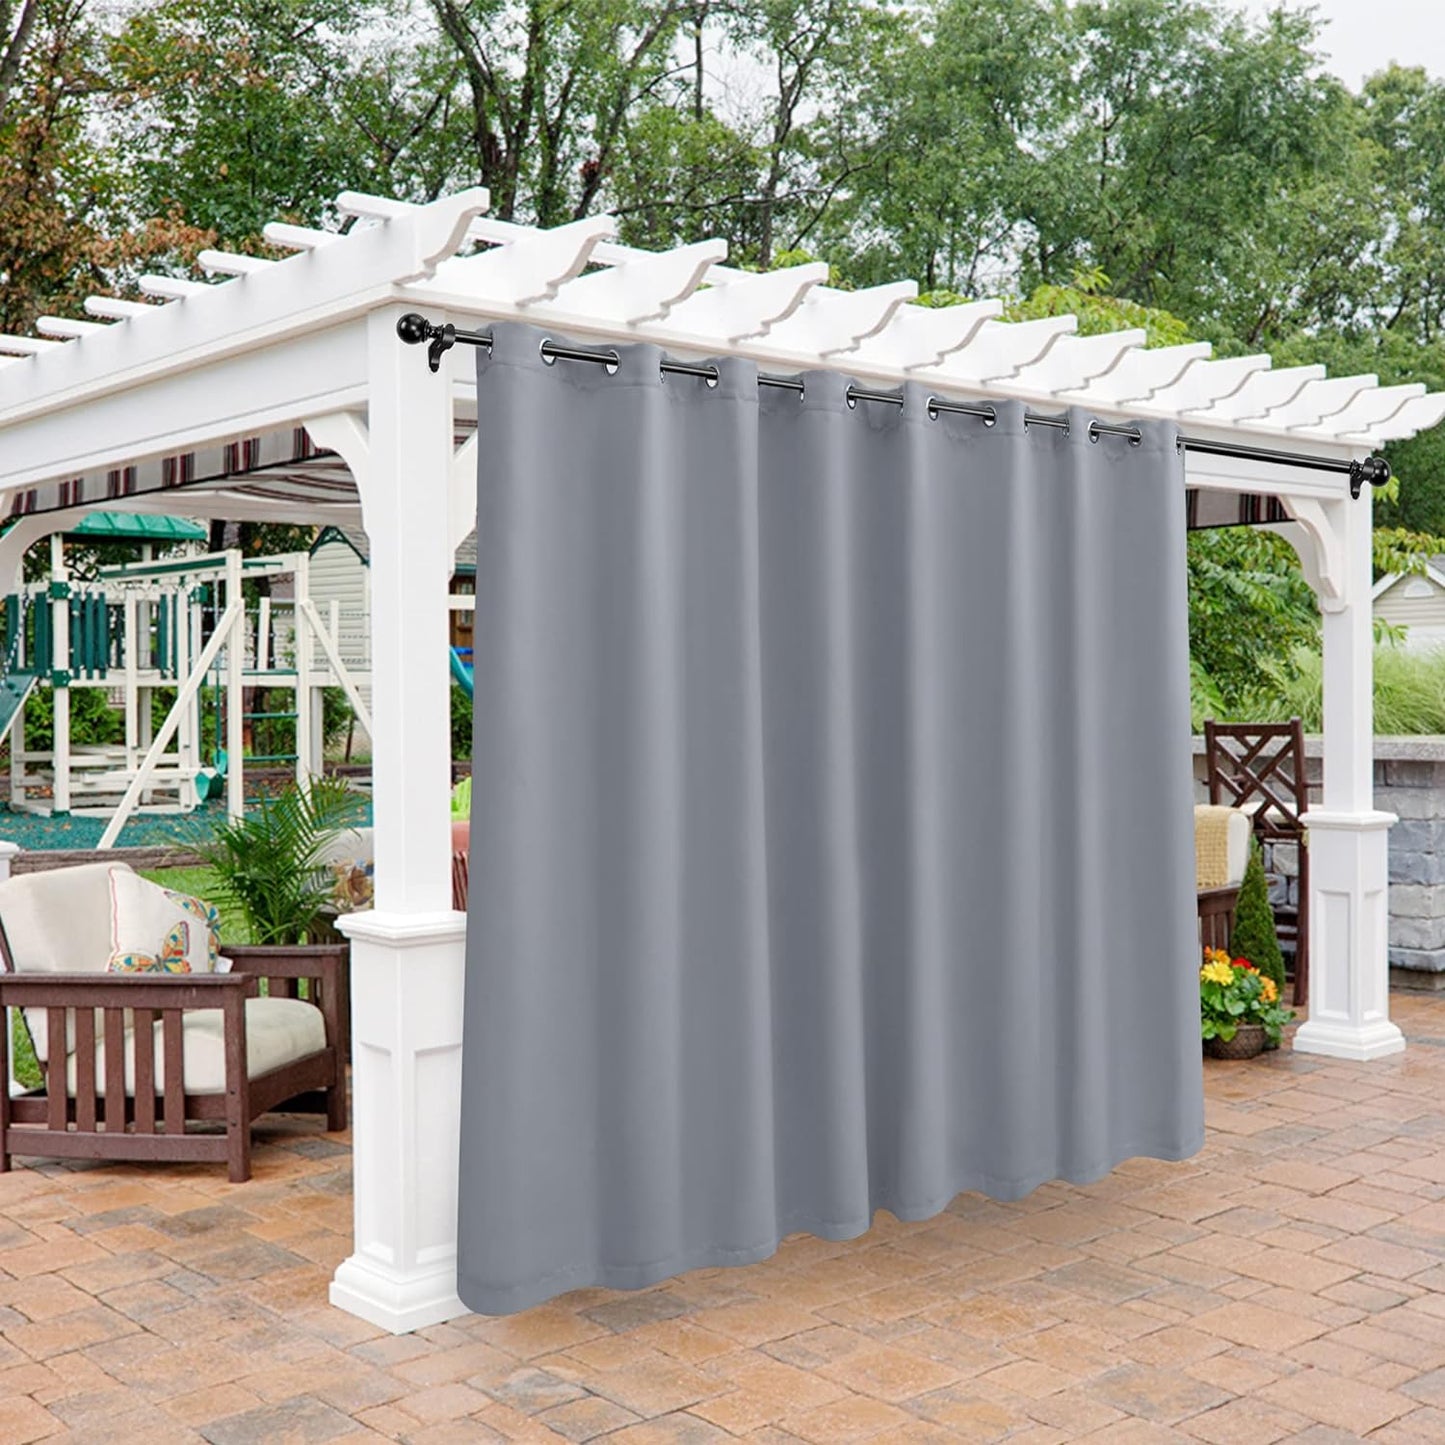 BONZER Outdoor Curtains for Patio Waterproof - Light Blocking Weather Resistant Privacy Grommet Blackout Curtains for Gazebo, Porch, Pergola, Cabana, Deck, Sunroom, 1 Panel, 52W X 84L Inch, Silver  BONZER Silver 120W X 84 Inch 